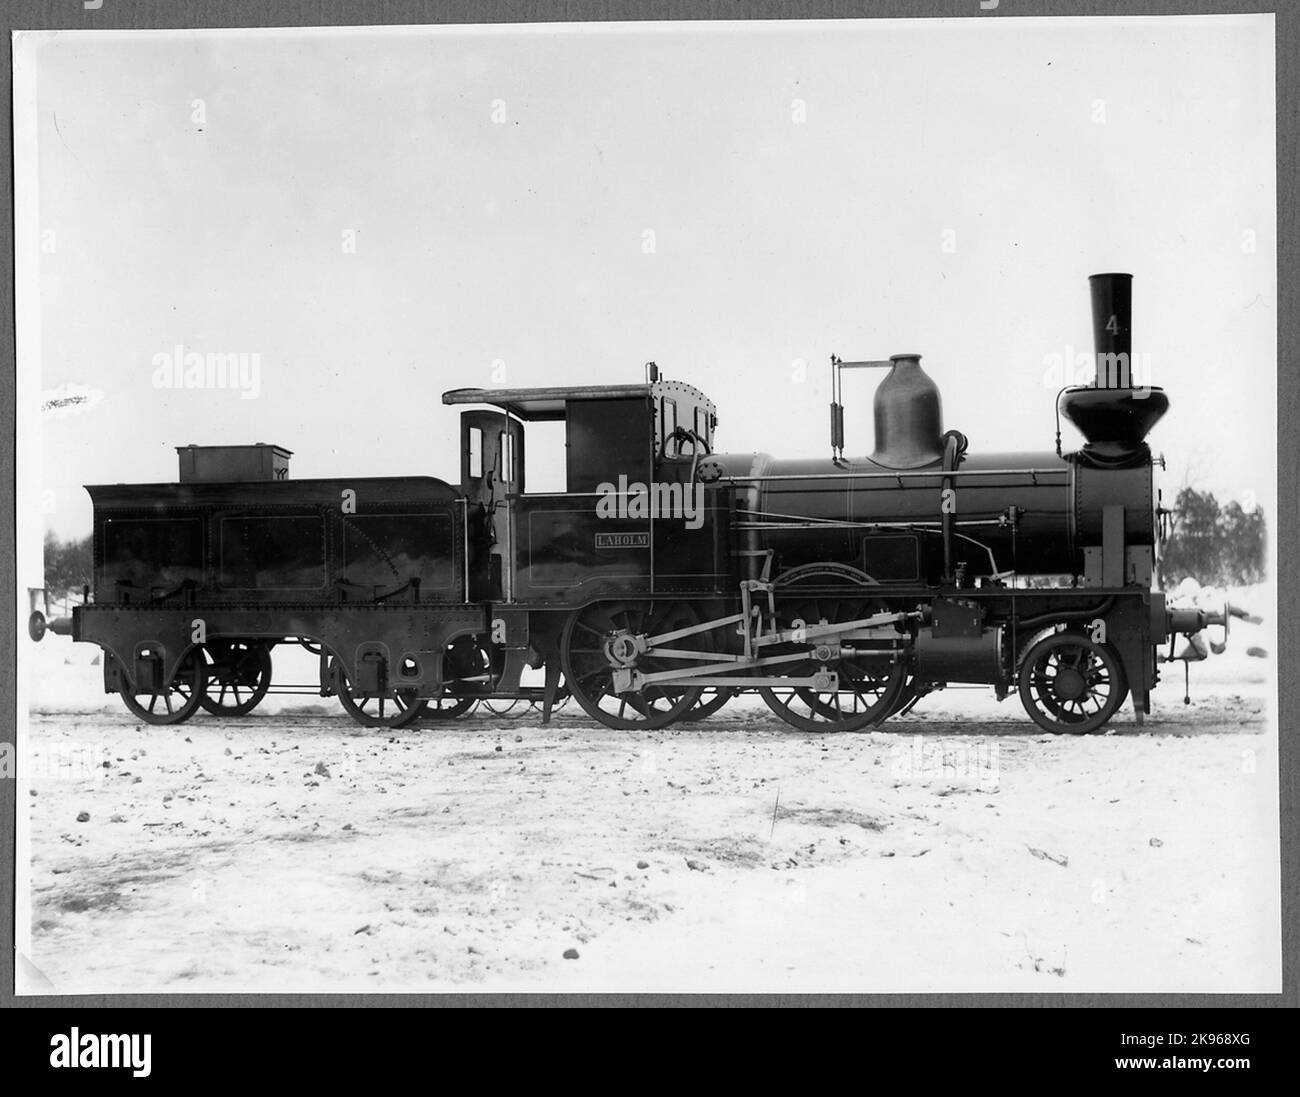 Delivery photo, Skåne Halaland Railway, Shj Lok 4 'Laholm', made in 1884 by Nohab. In 1896, the locomotive was sold to the State Railways and got Littera SJ VKBD 489. It was scrapped in 1915. Stock Photo